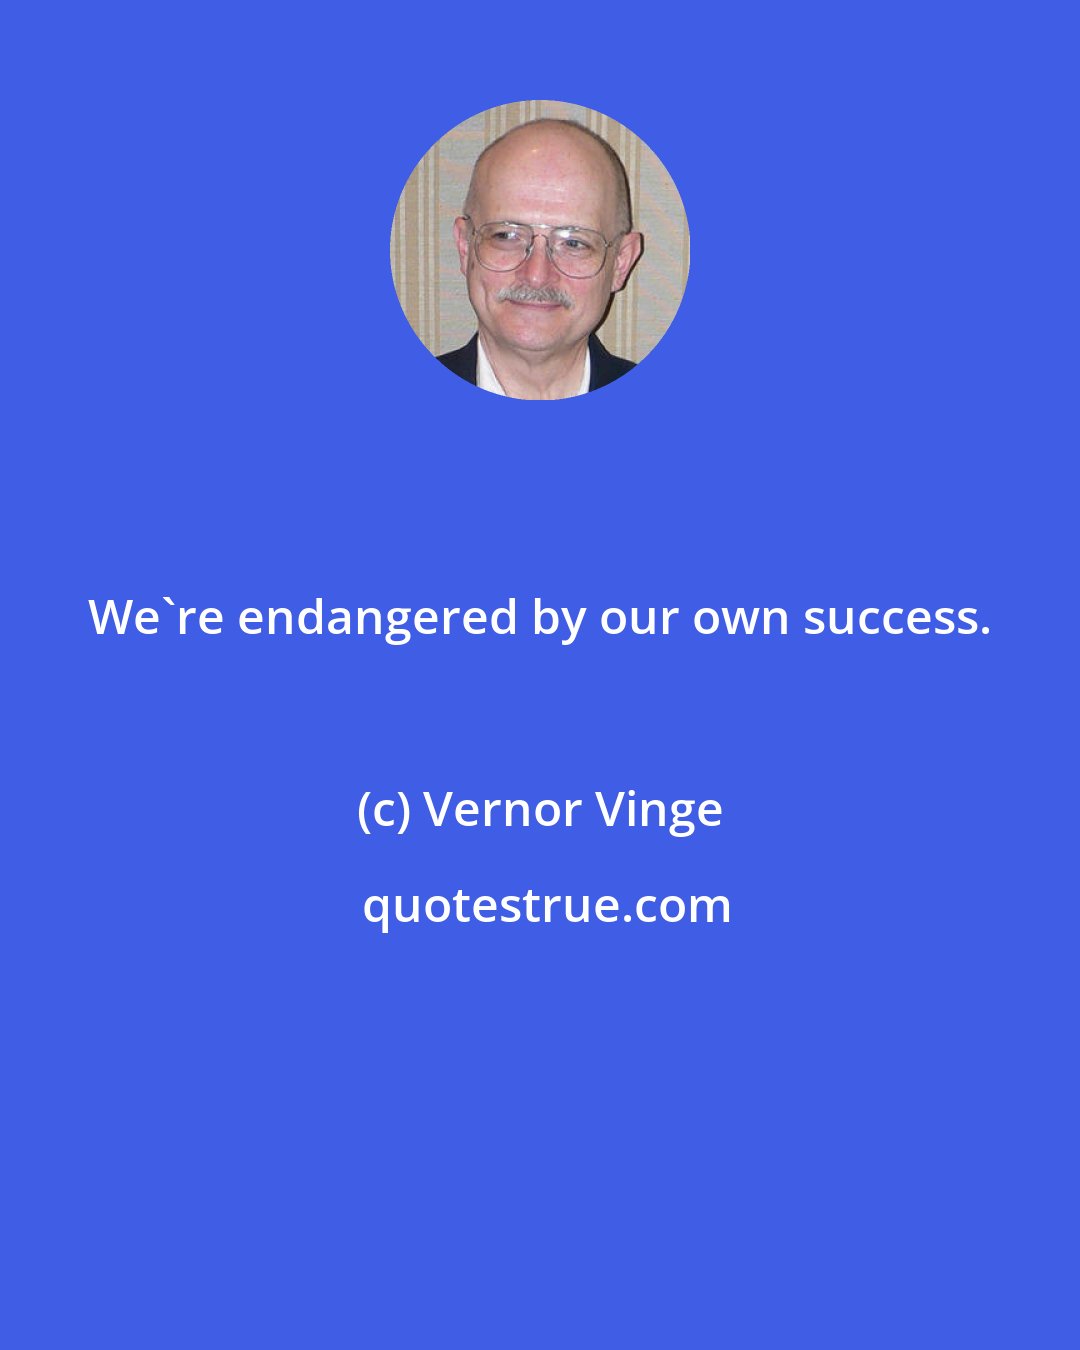 Vernor Vinge: We're endangered by our own success.